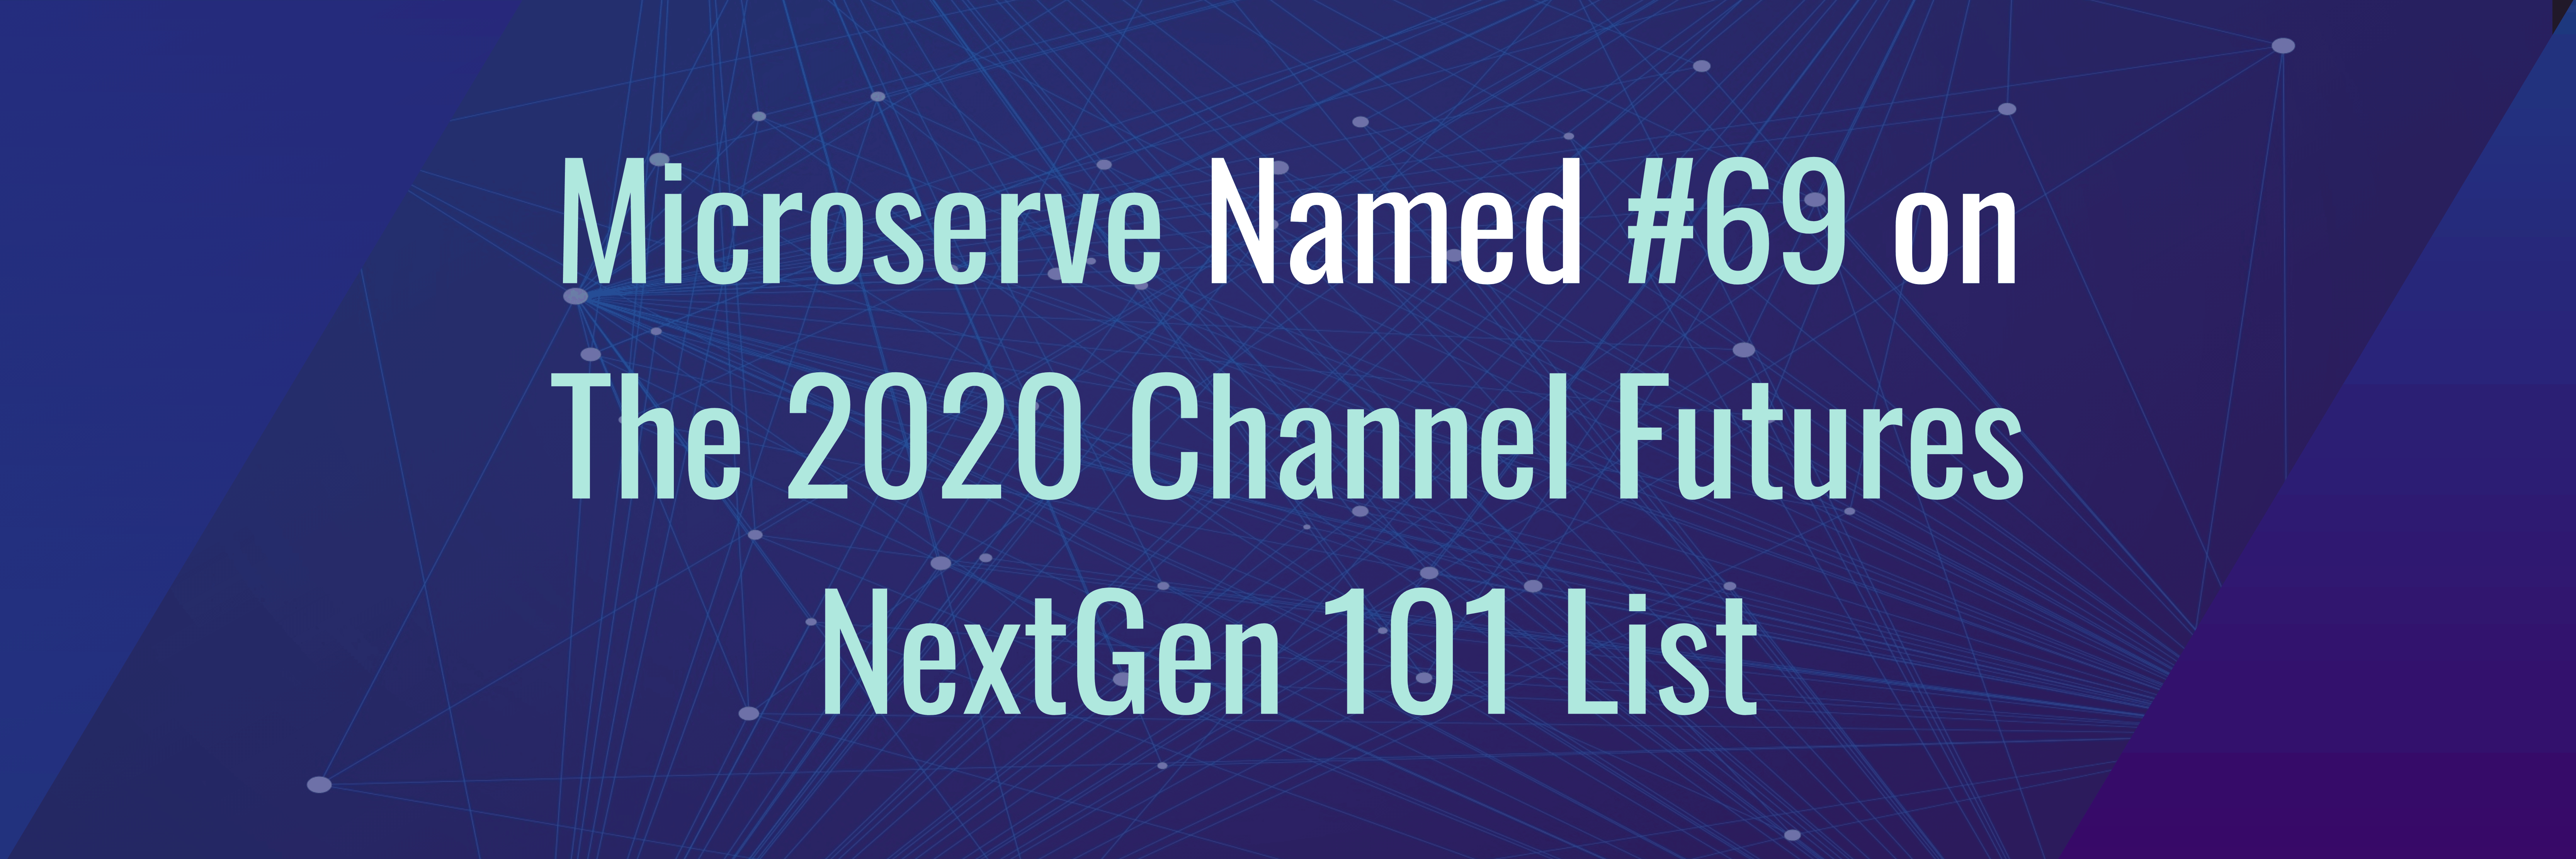 Microserve Named #69 on The 2020 Channel Futures NextGen 101 List